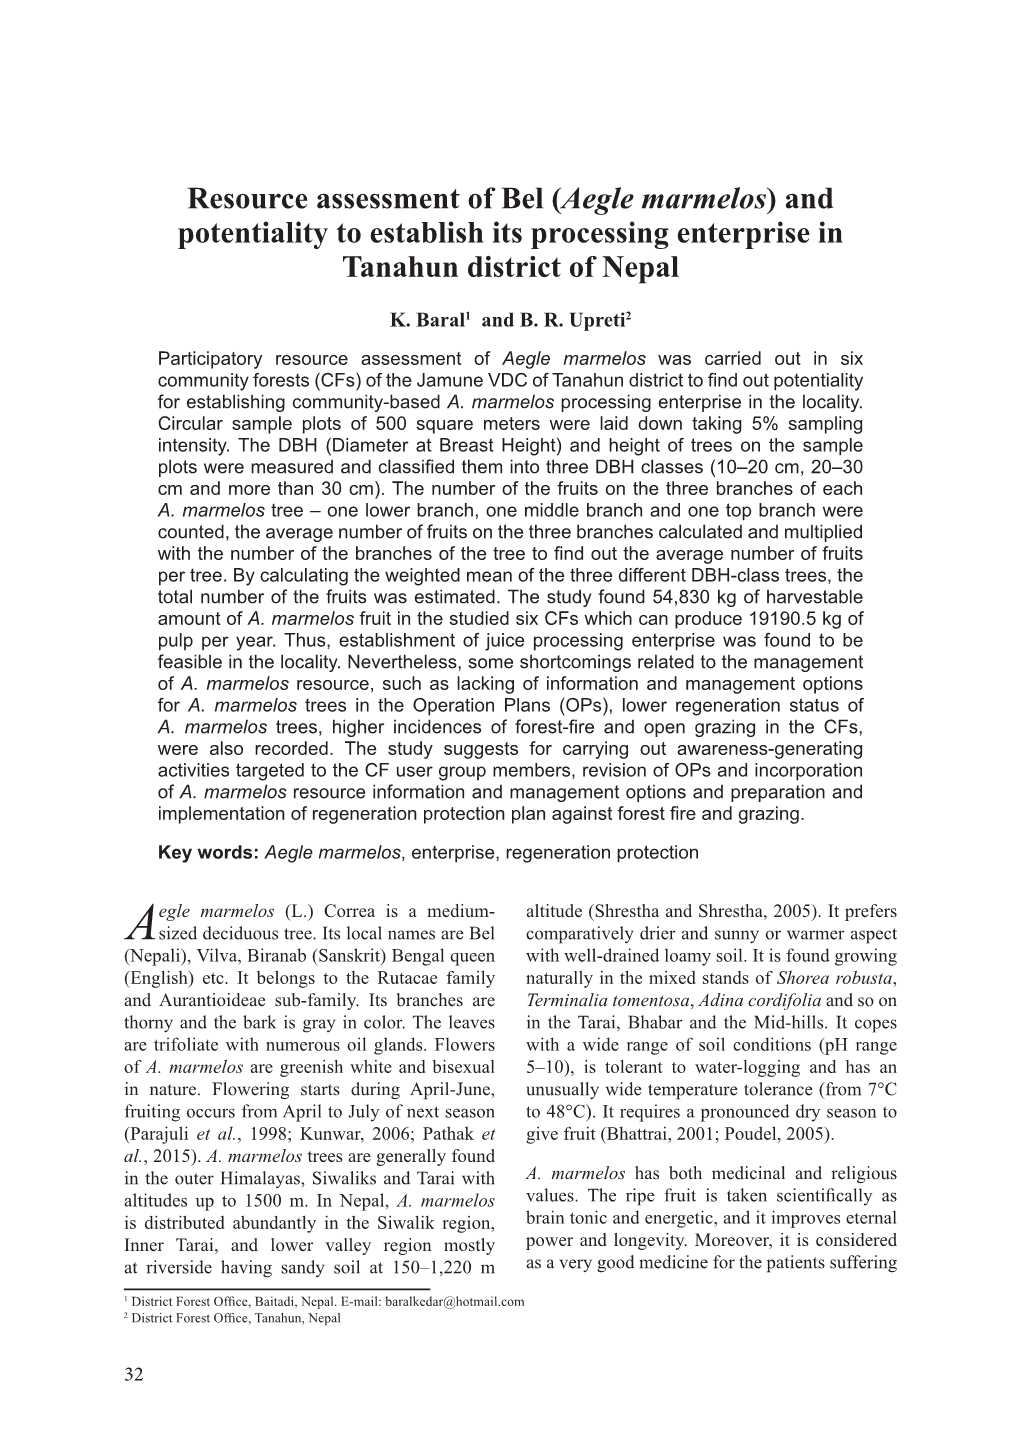 Resource Assessment of Bel (Aegle Marmelos) and Potentiality to Establish Its Processing Enterprise in Tanahun District of Nepal